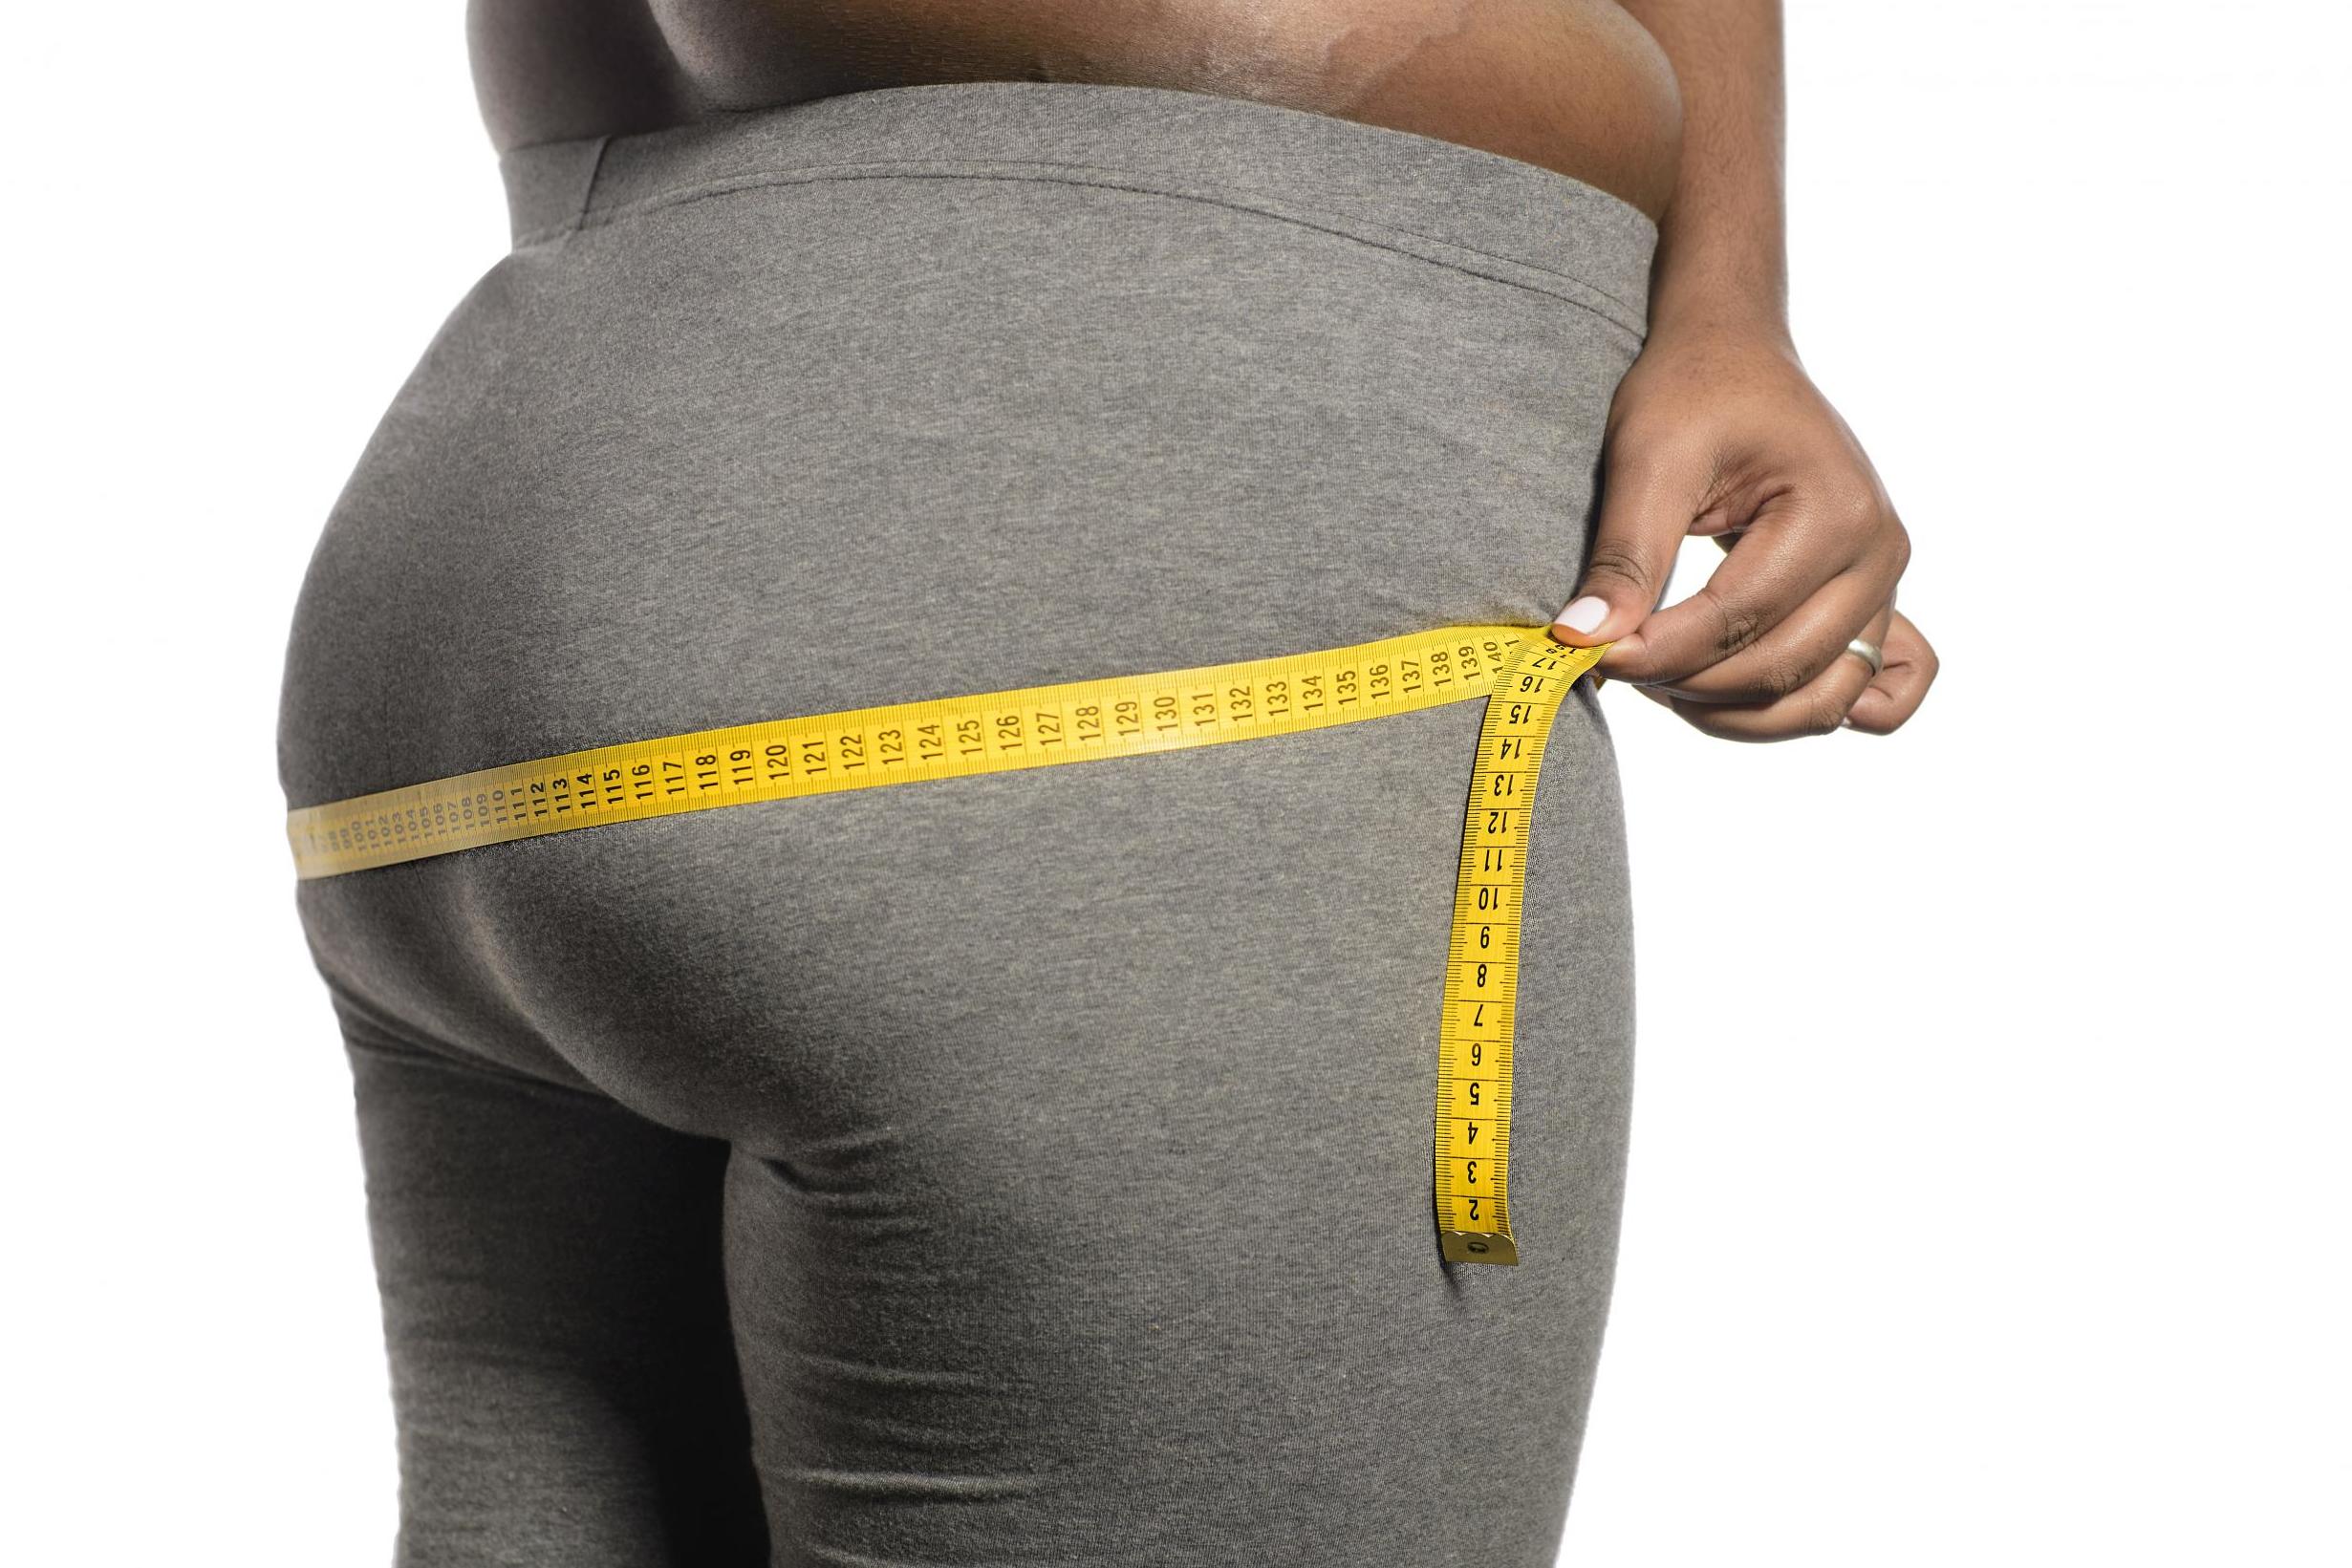 Pear-shaped women benefit from better health, finds study